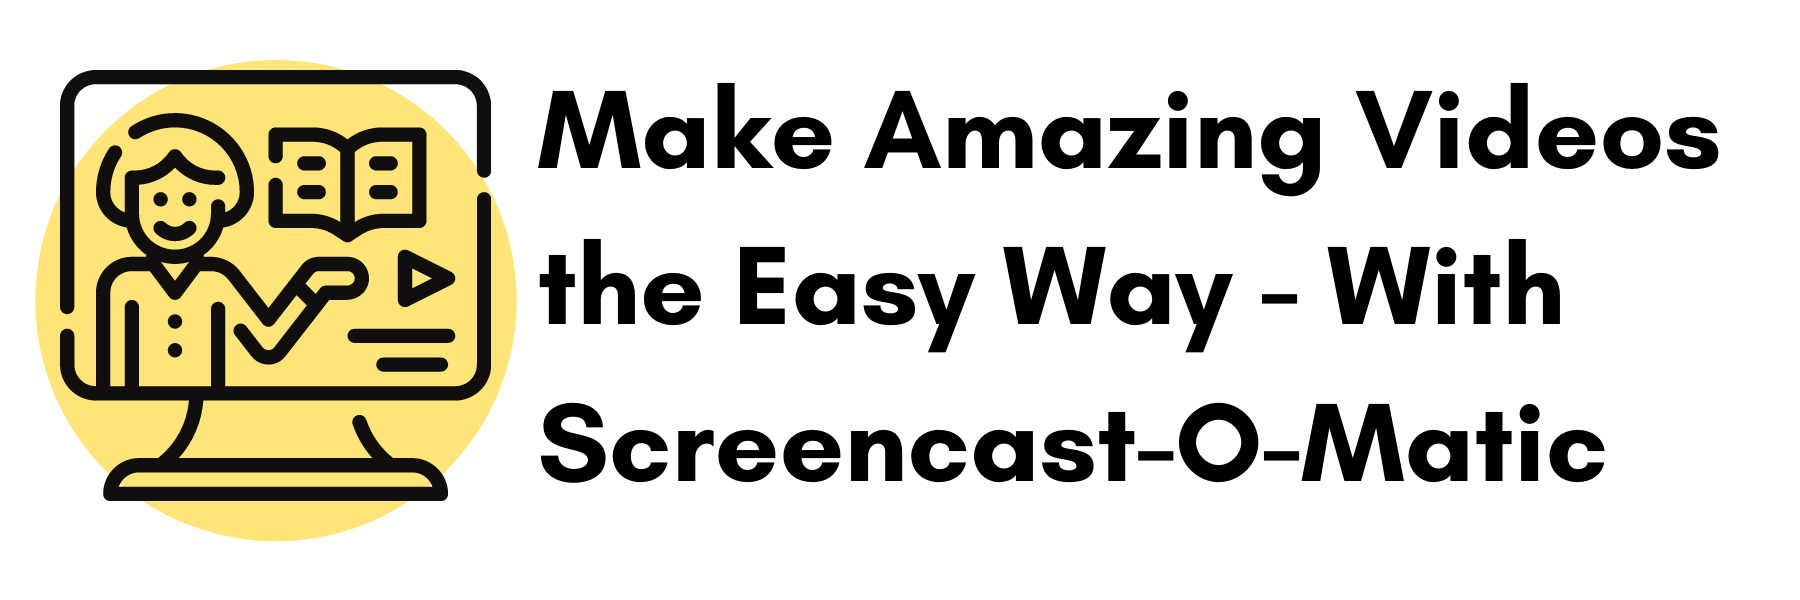 Make Amazing Videos the Easy Way - With Screencast-O-Matic